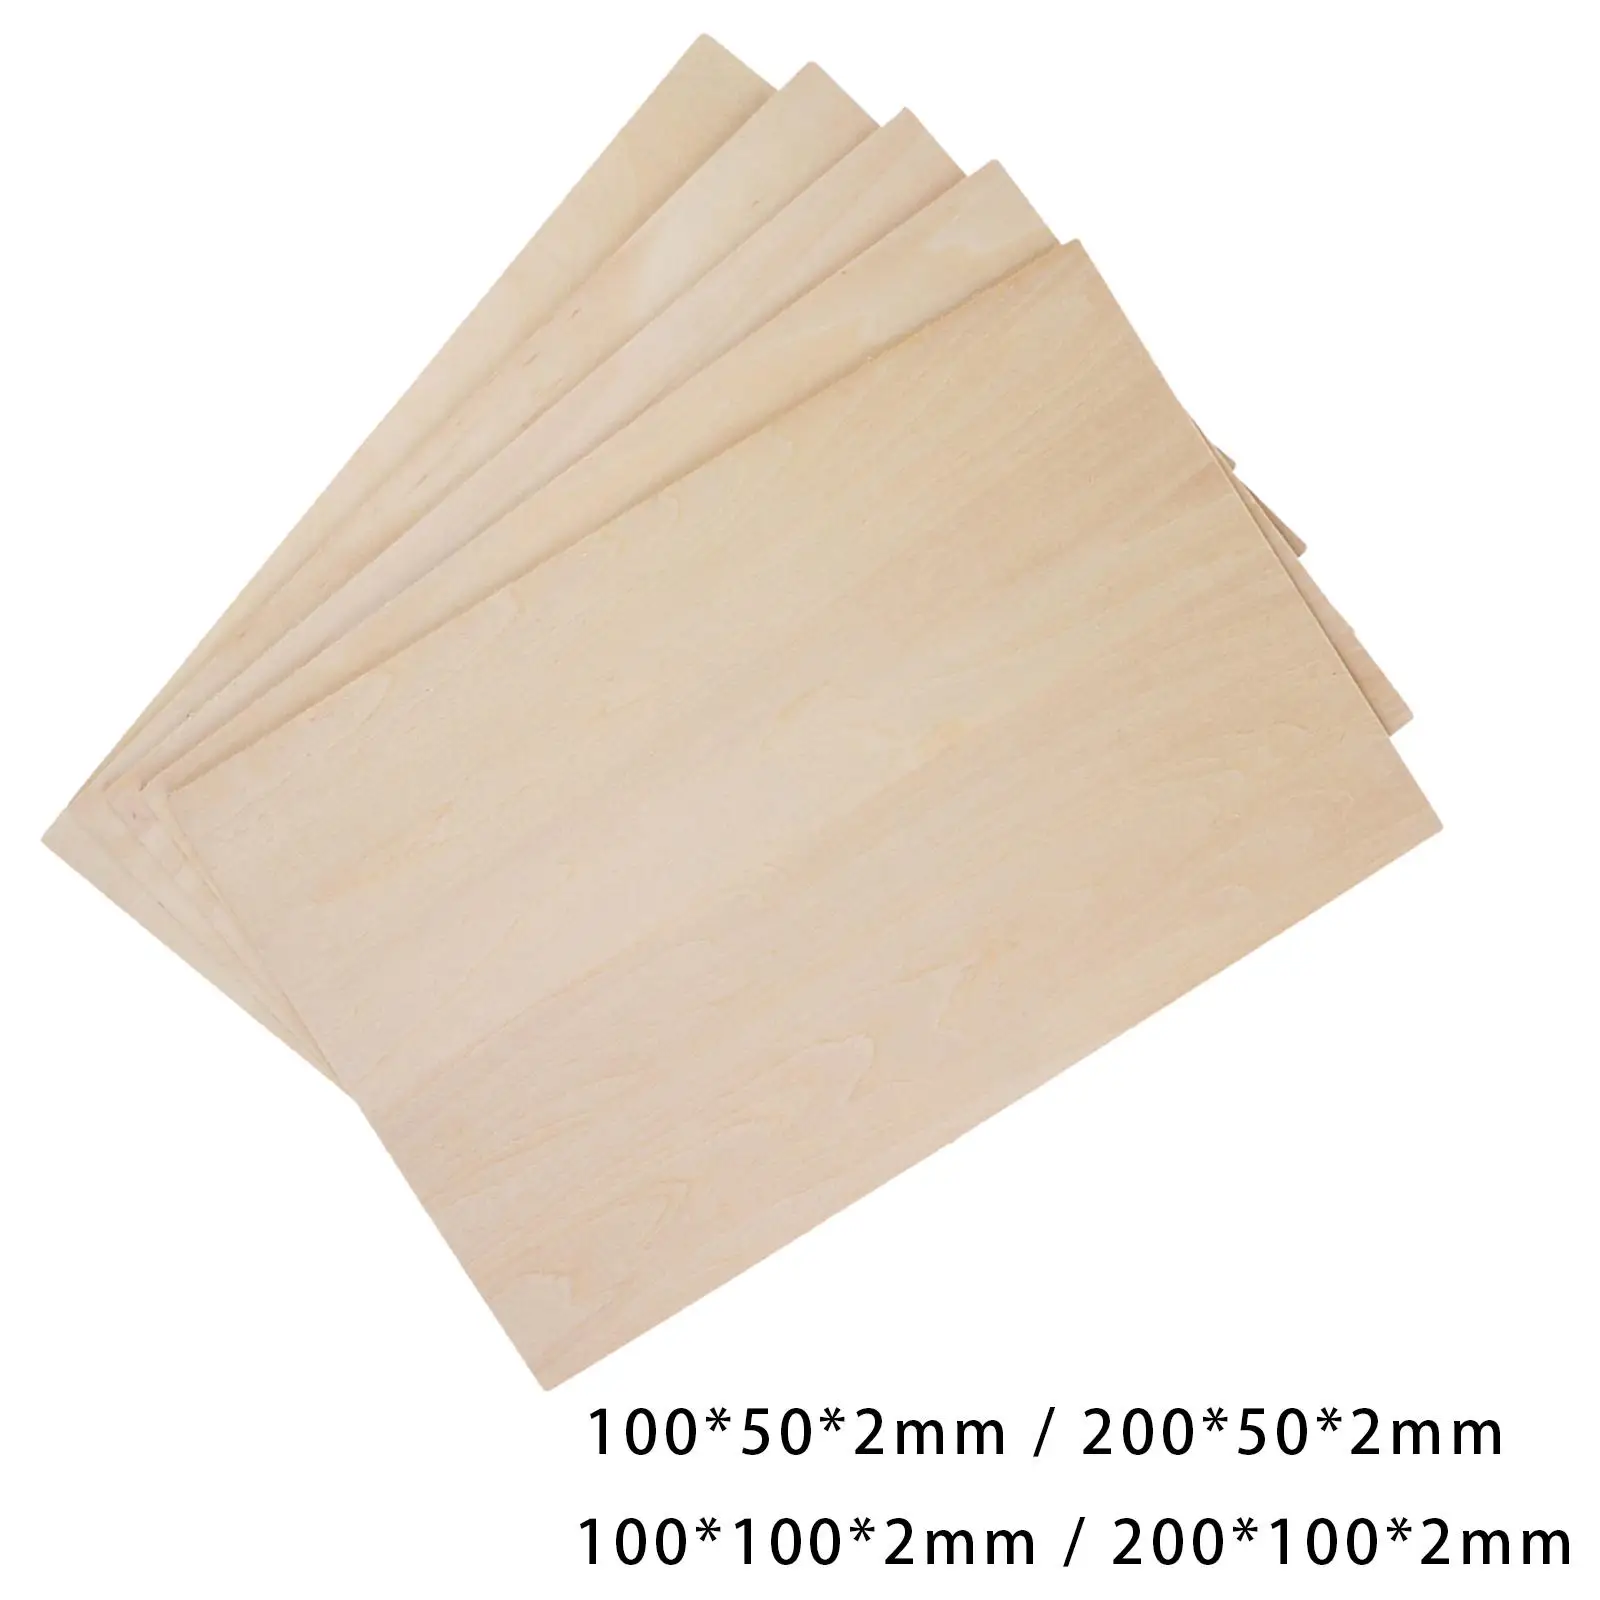 10Pcs Unfinished Wood Basswood Sheets Thin Plywood Board for Mini House Crafts DIY Project Miniature Aircraft Making Plane Model